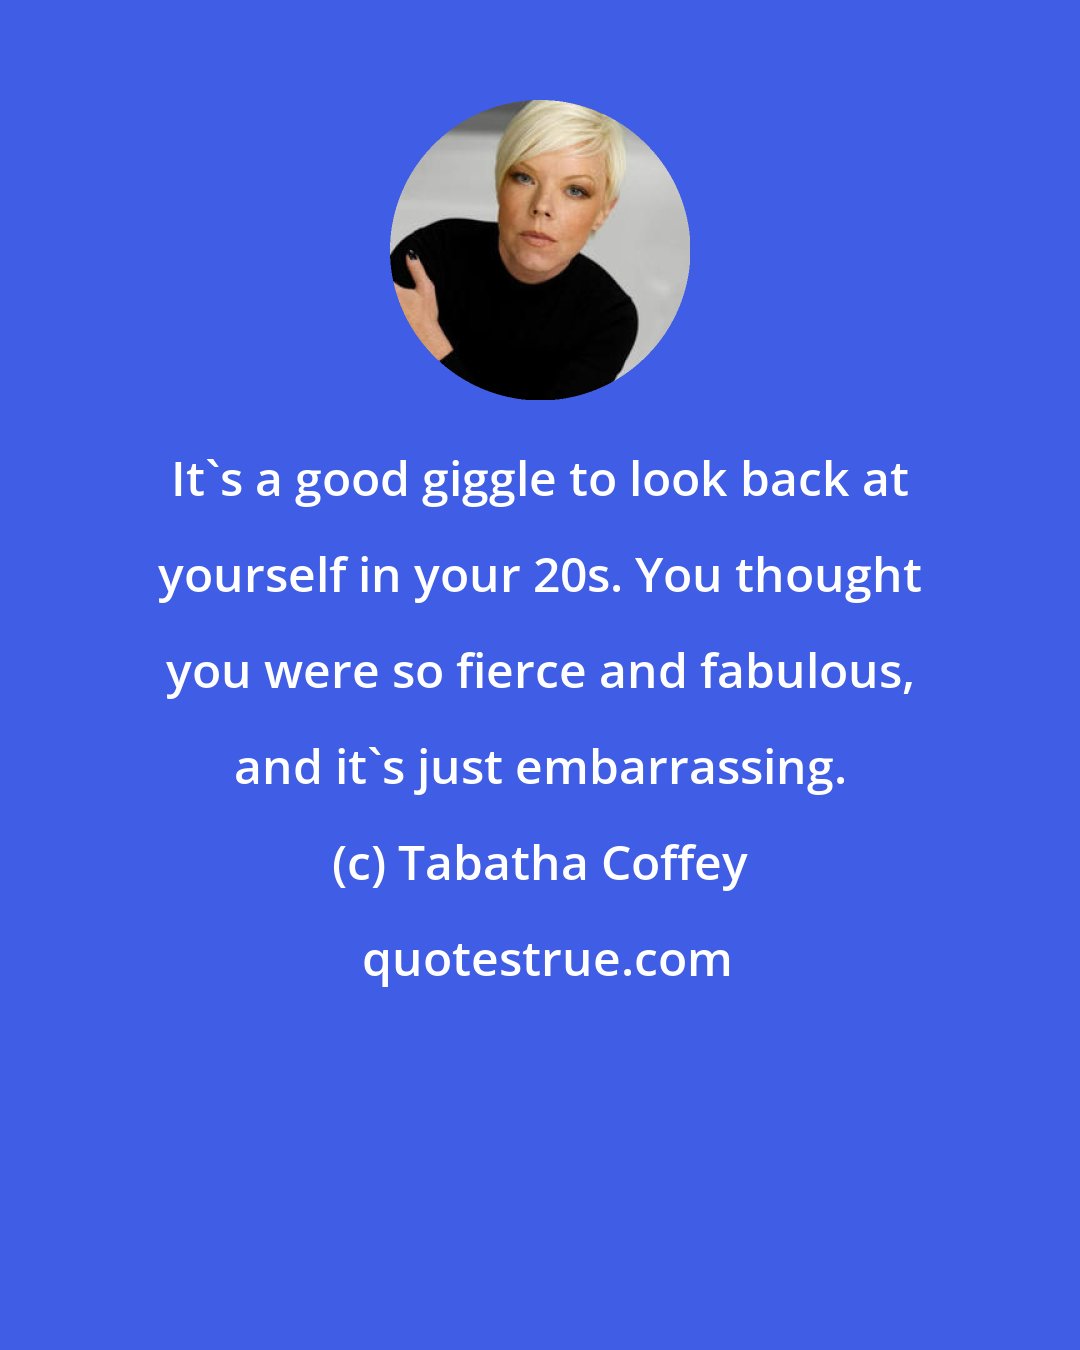 Tabatha Coffey: It's a good giggle to look back at yourself in your 20s. You thought you were so fierce and fabulous, and it's just embarrassing.